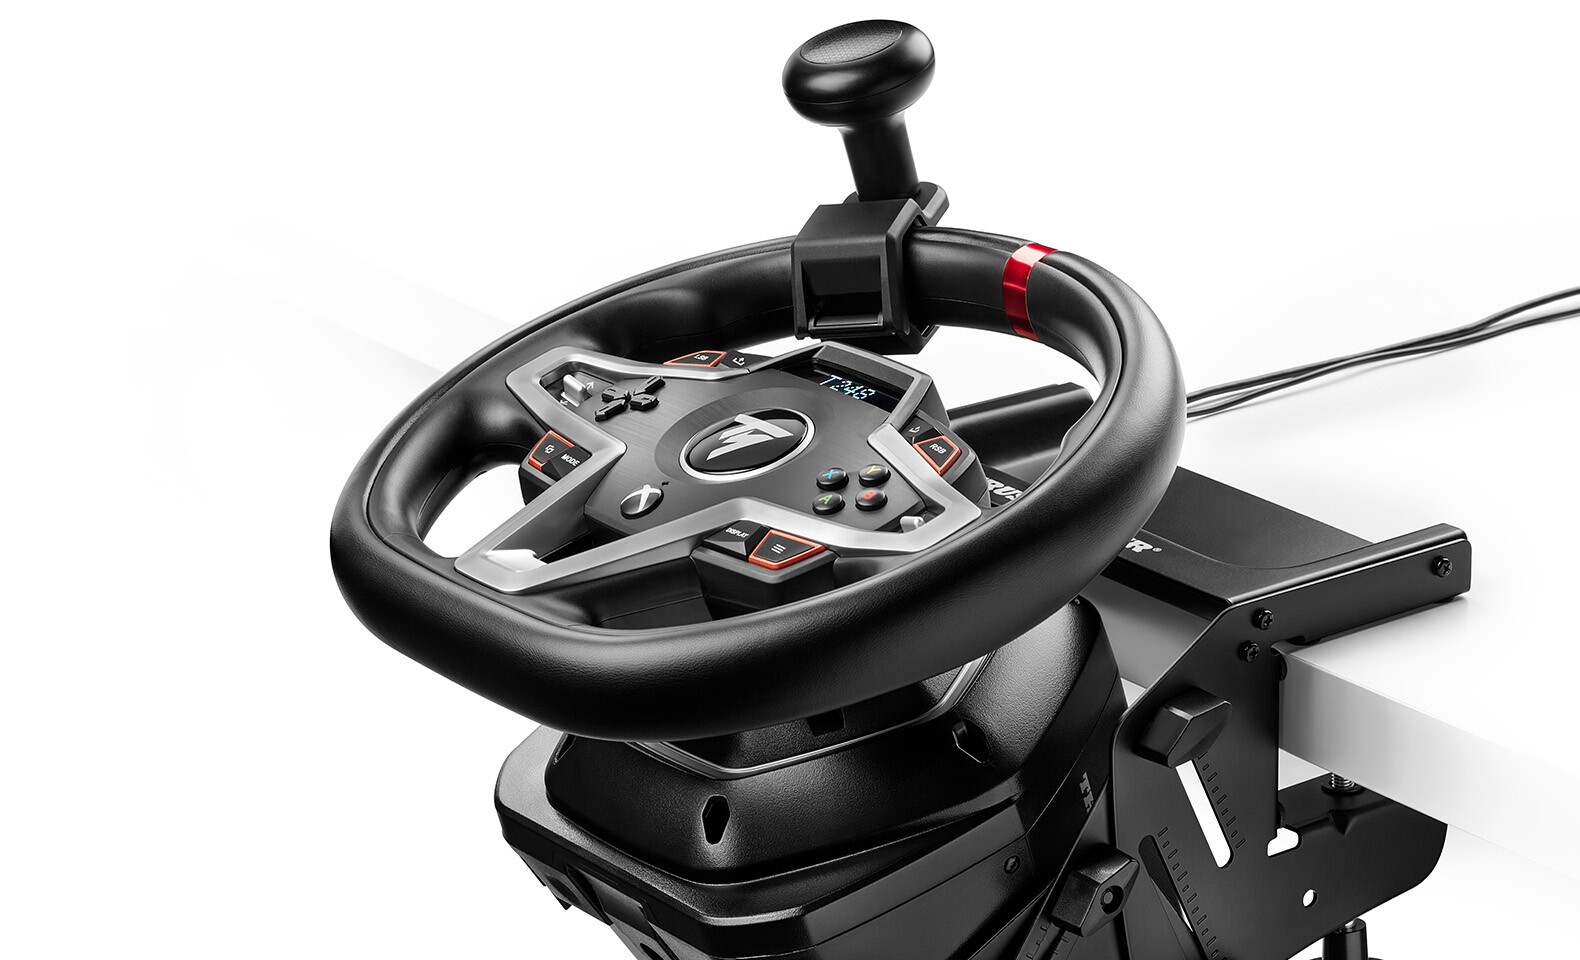 Thrustmaster Introduces its SimTask Steering Kit - Designed for